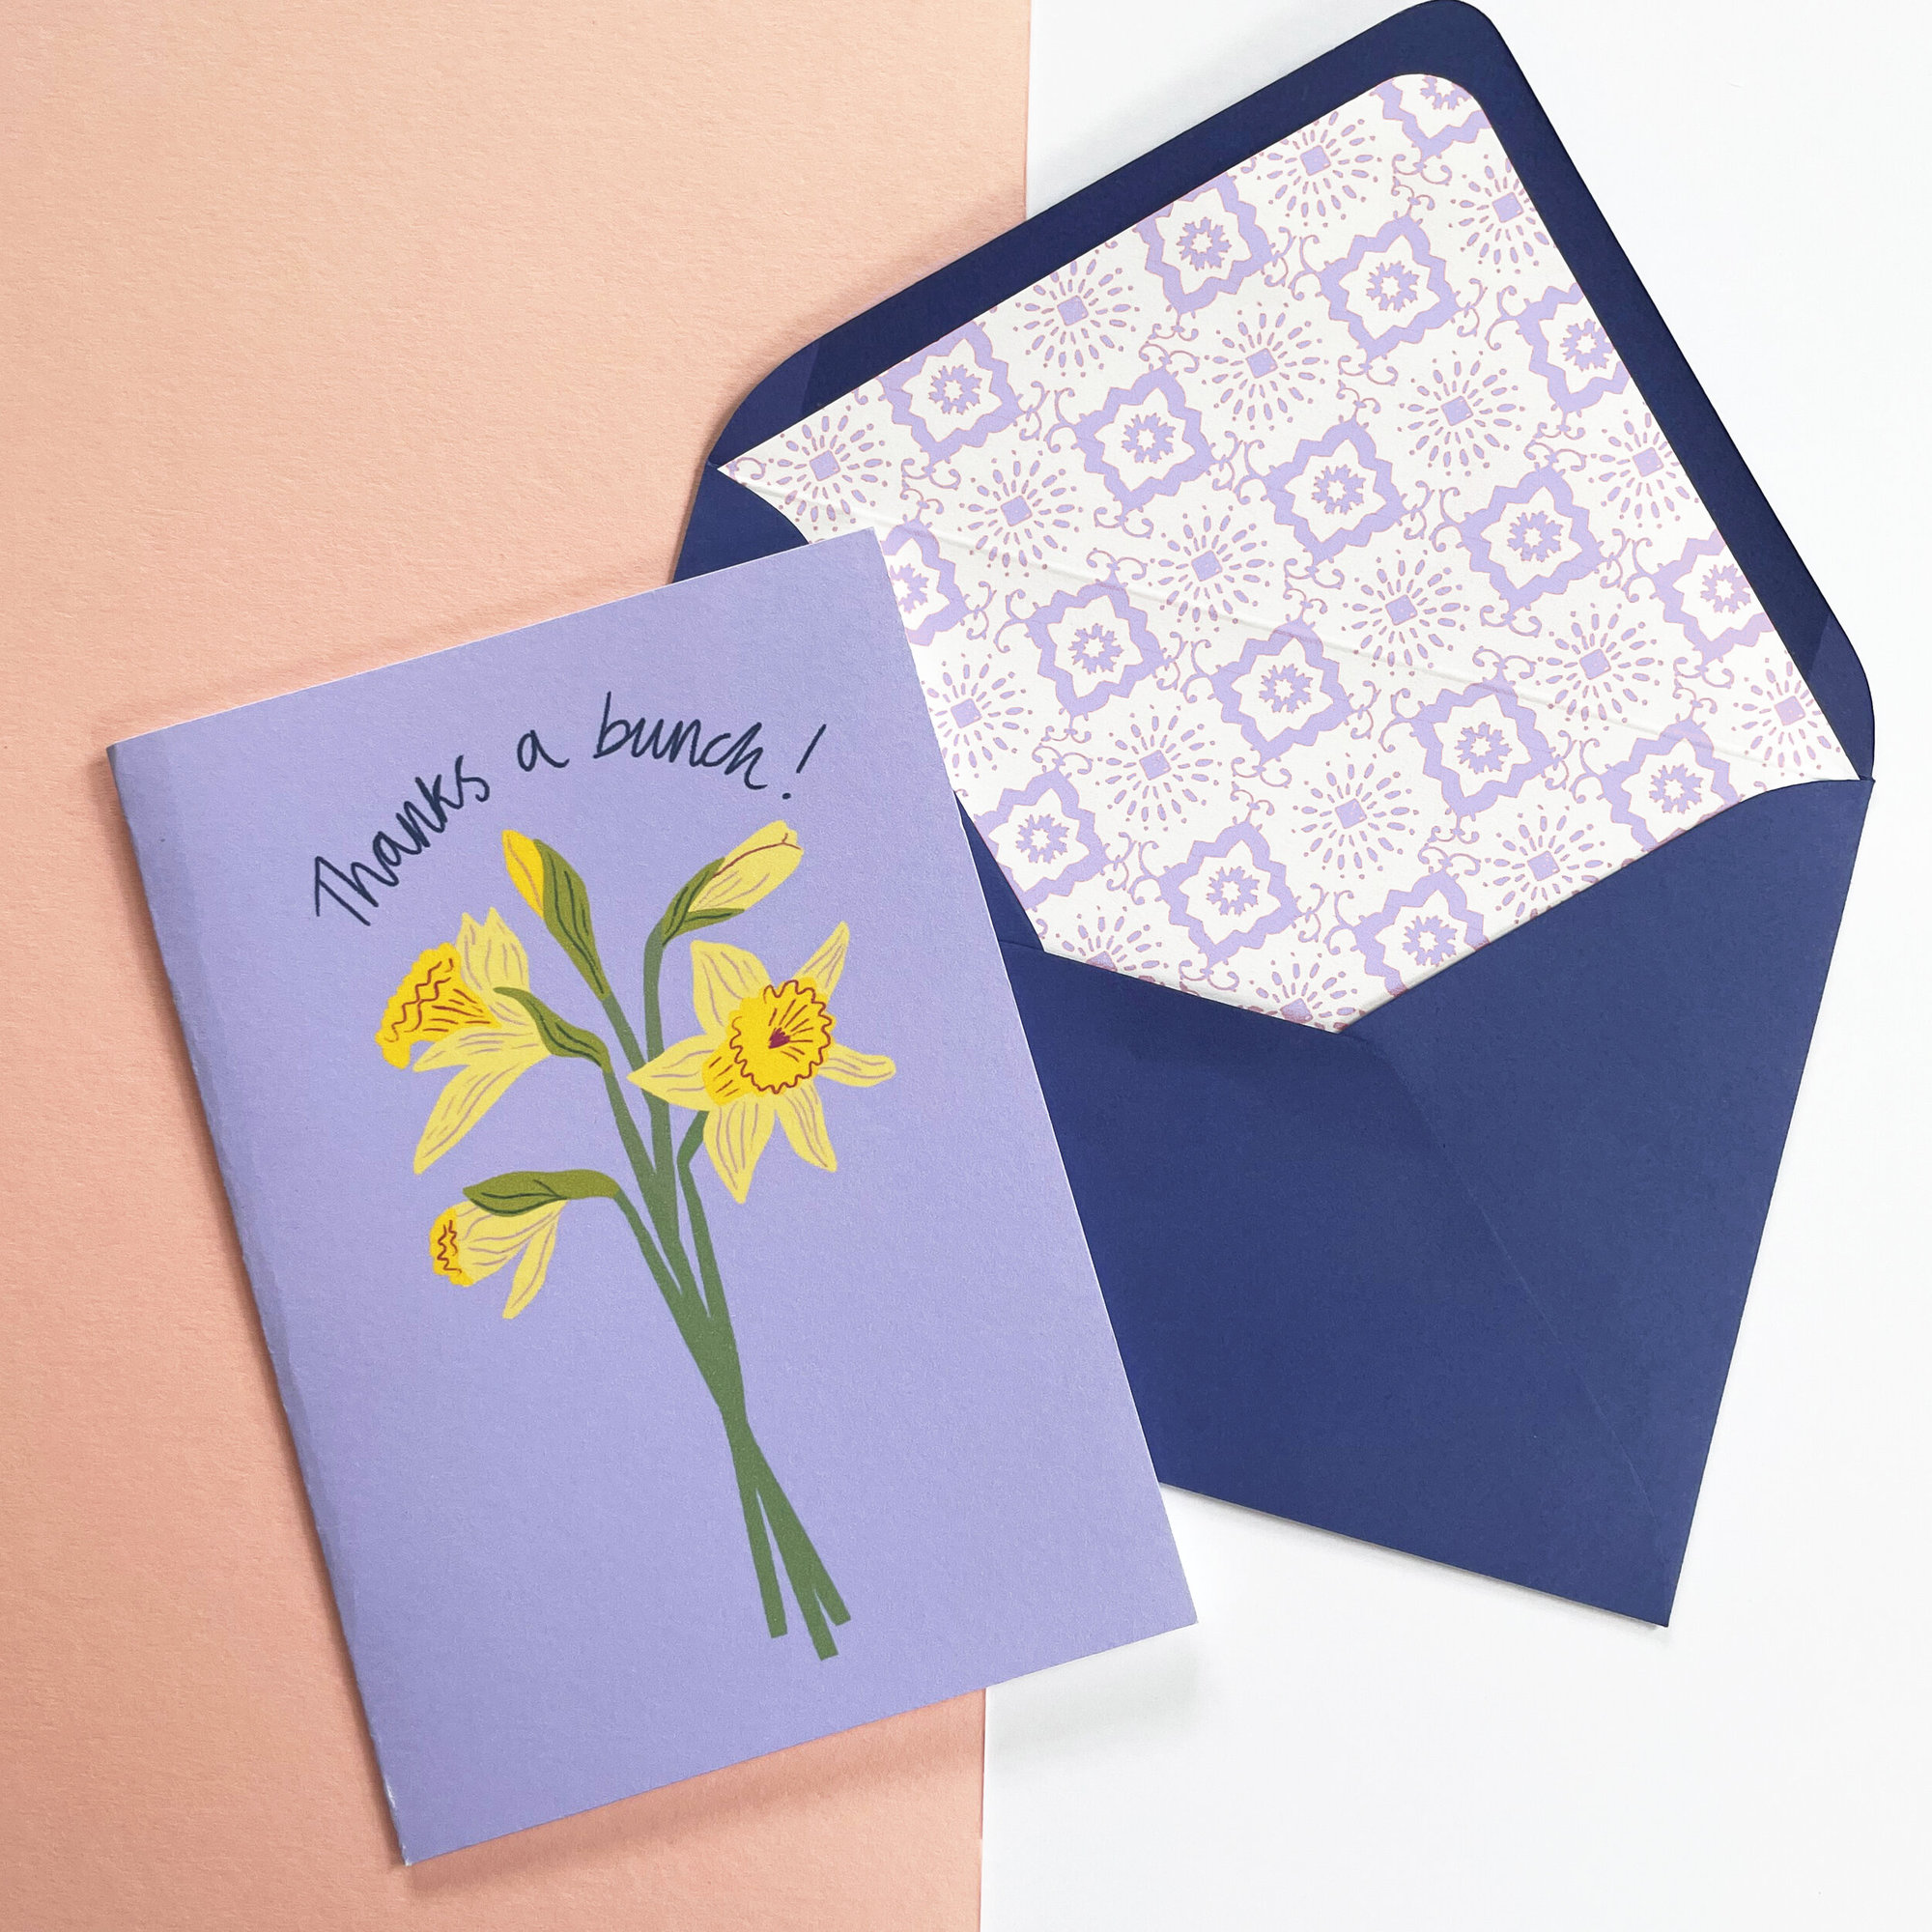 'thanks A Bunch!'
Daffodils Card - Just the card, Lined Envelope